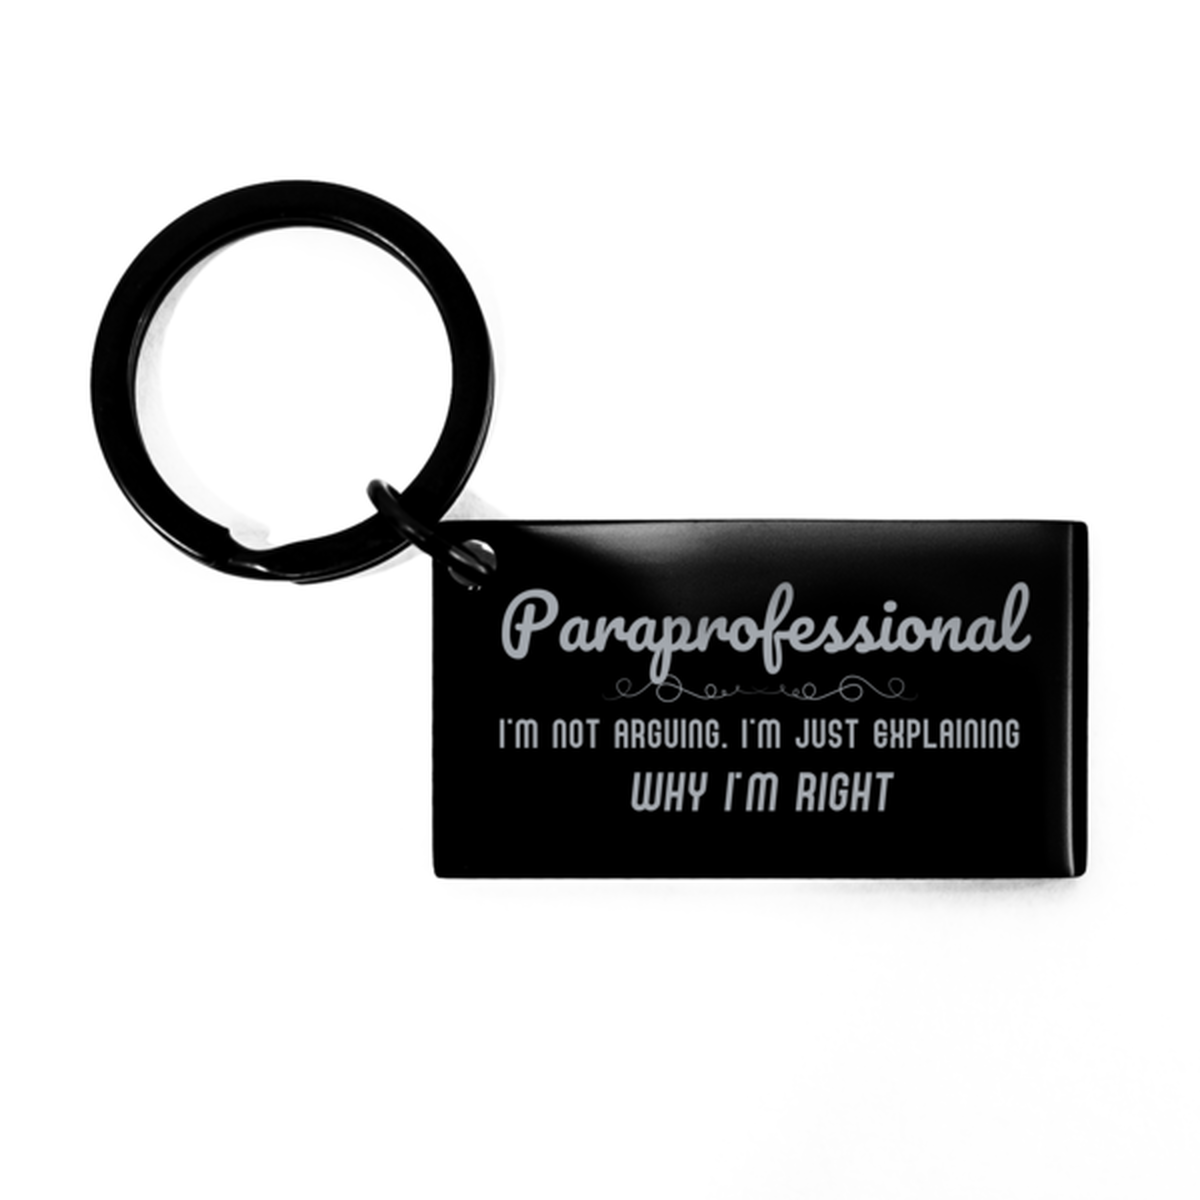 Paraprofessional I'm not Arguing. I'm Just Explaining Why I'm RIGHT Keychain, Funny Saying Quote Paraprofessional Gifts For Paraprofessional Graduation Birthday Christmas Gifts for Men Women Coworker